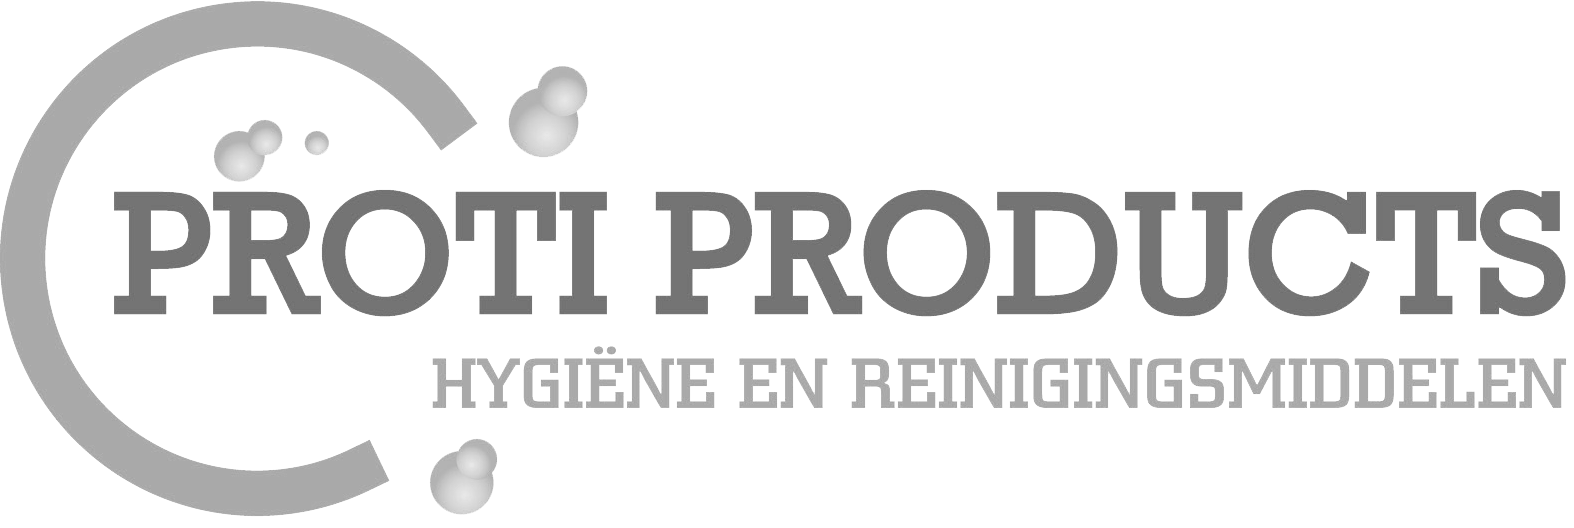 Proti-Products